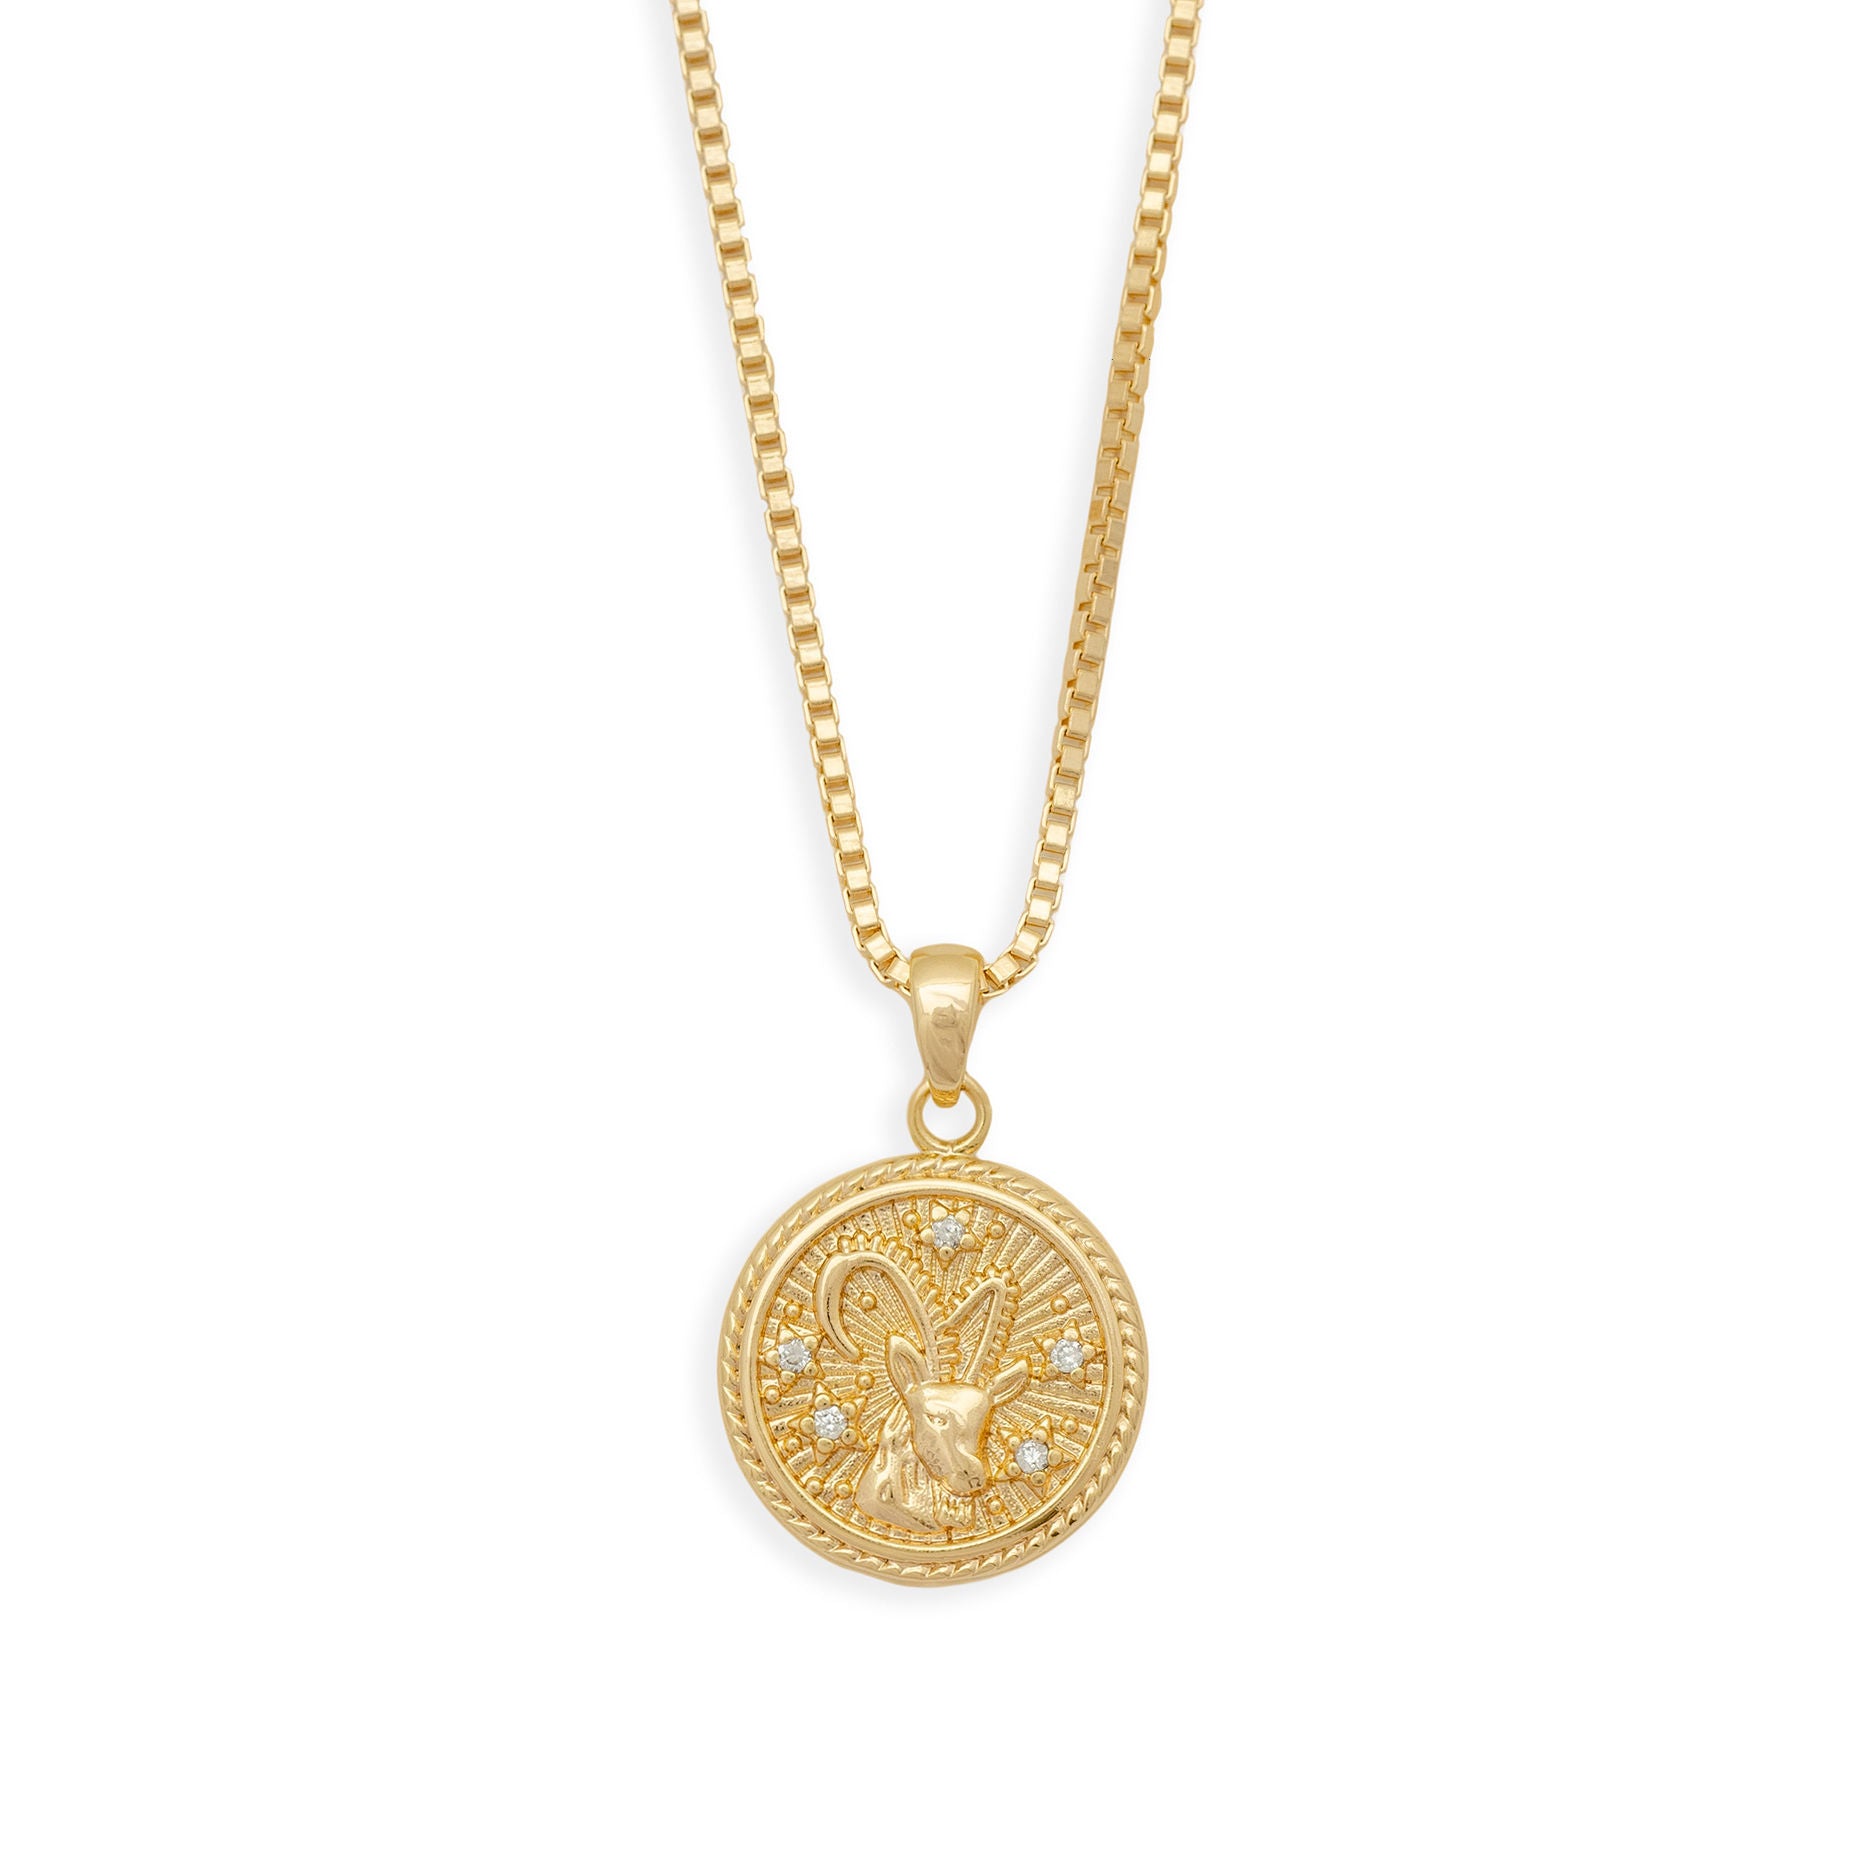 In the Stars Zodiac Necklace - Capricorn from Erin Fader Jewelry